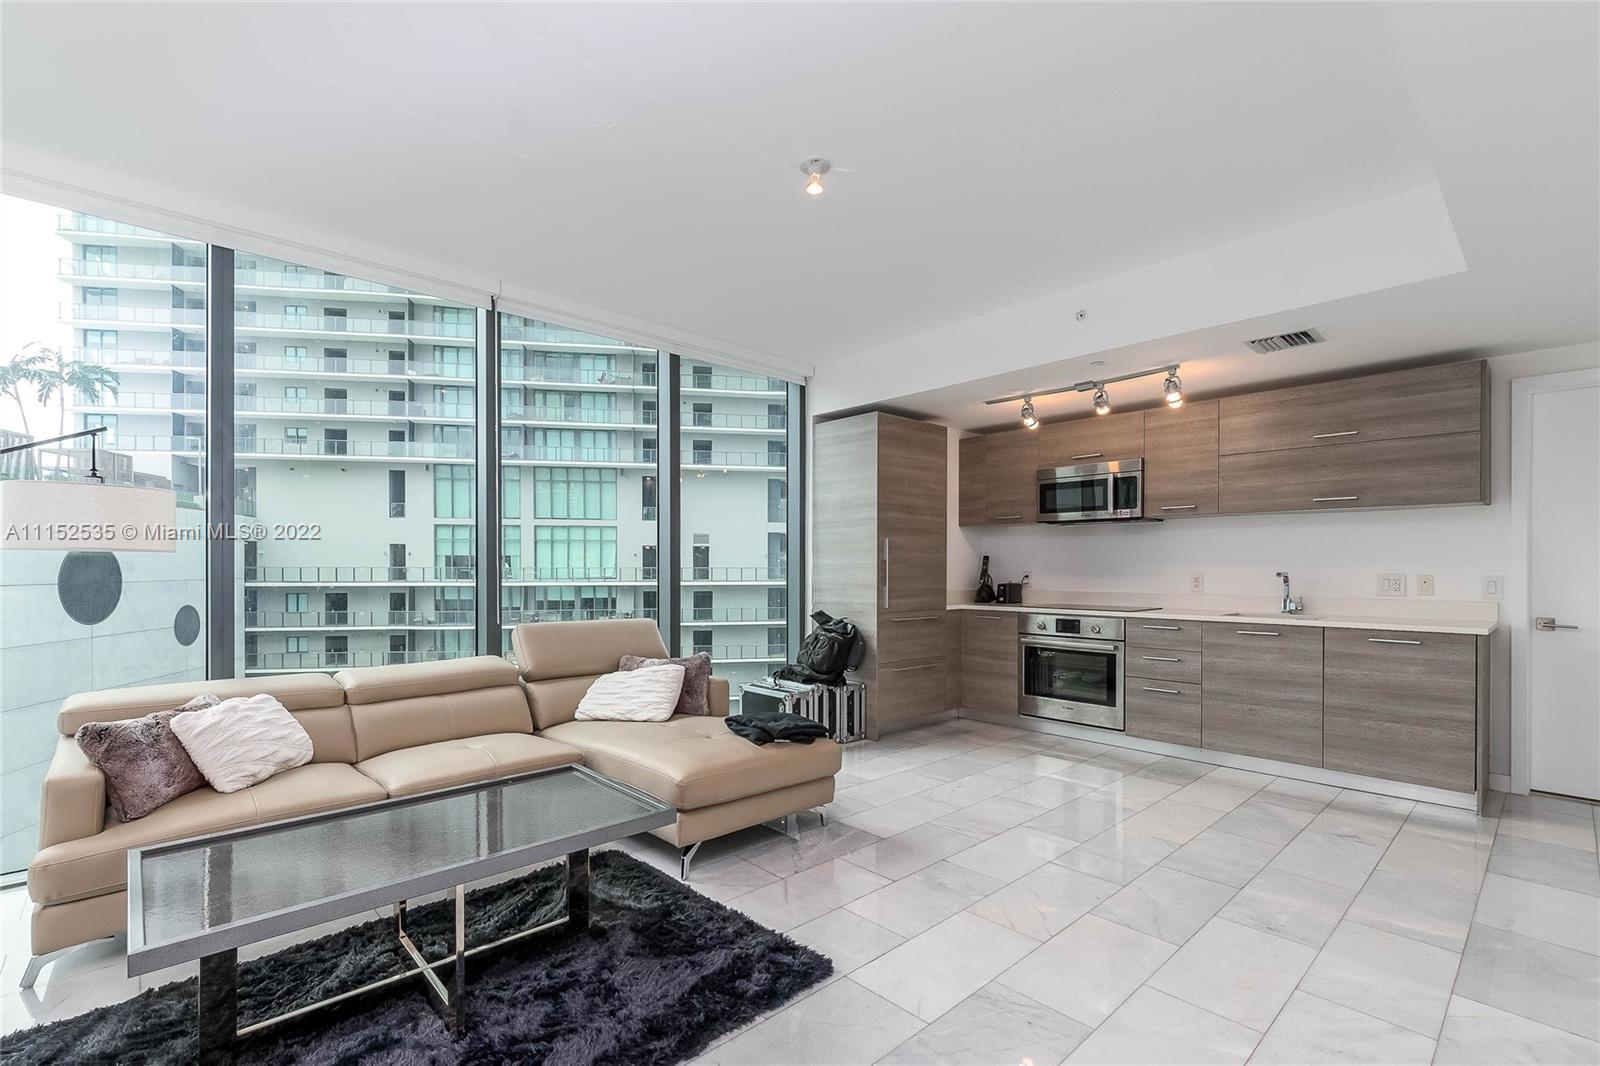 Beautiful corner residence with an abundance of natural light at Paraiso Bay in Edgewater. This 1 be